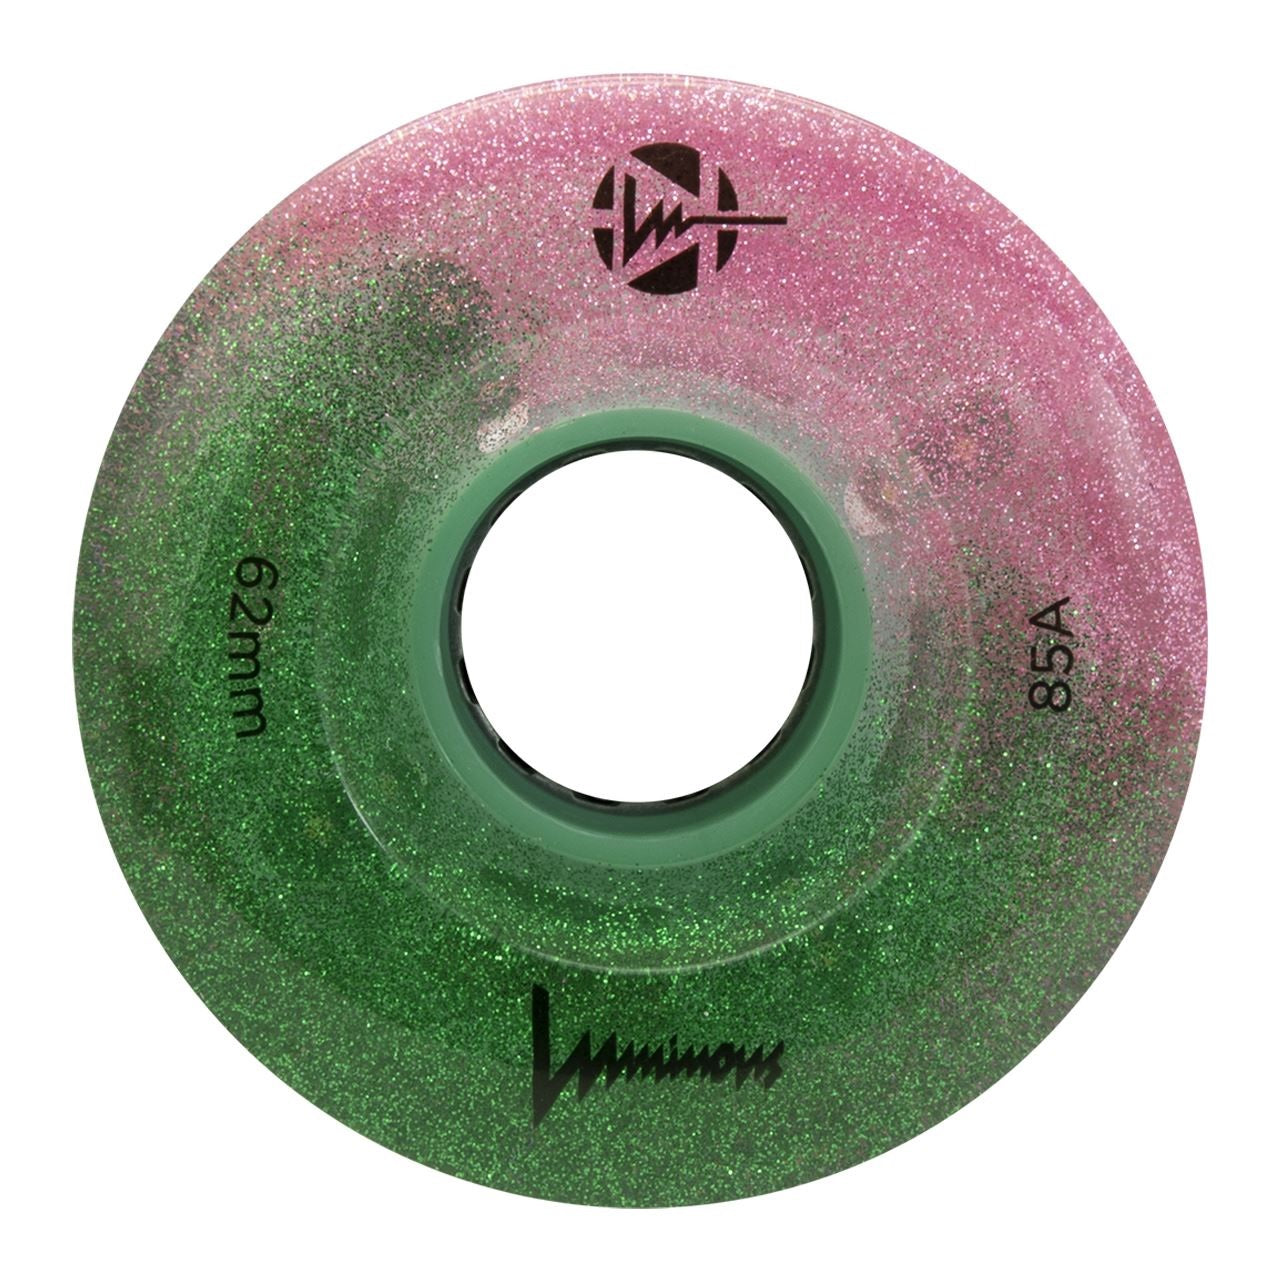 Luminous Light Up Quad Wheels Pink Forest 62mm 85a - 4 Pack